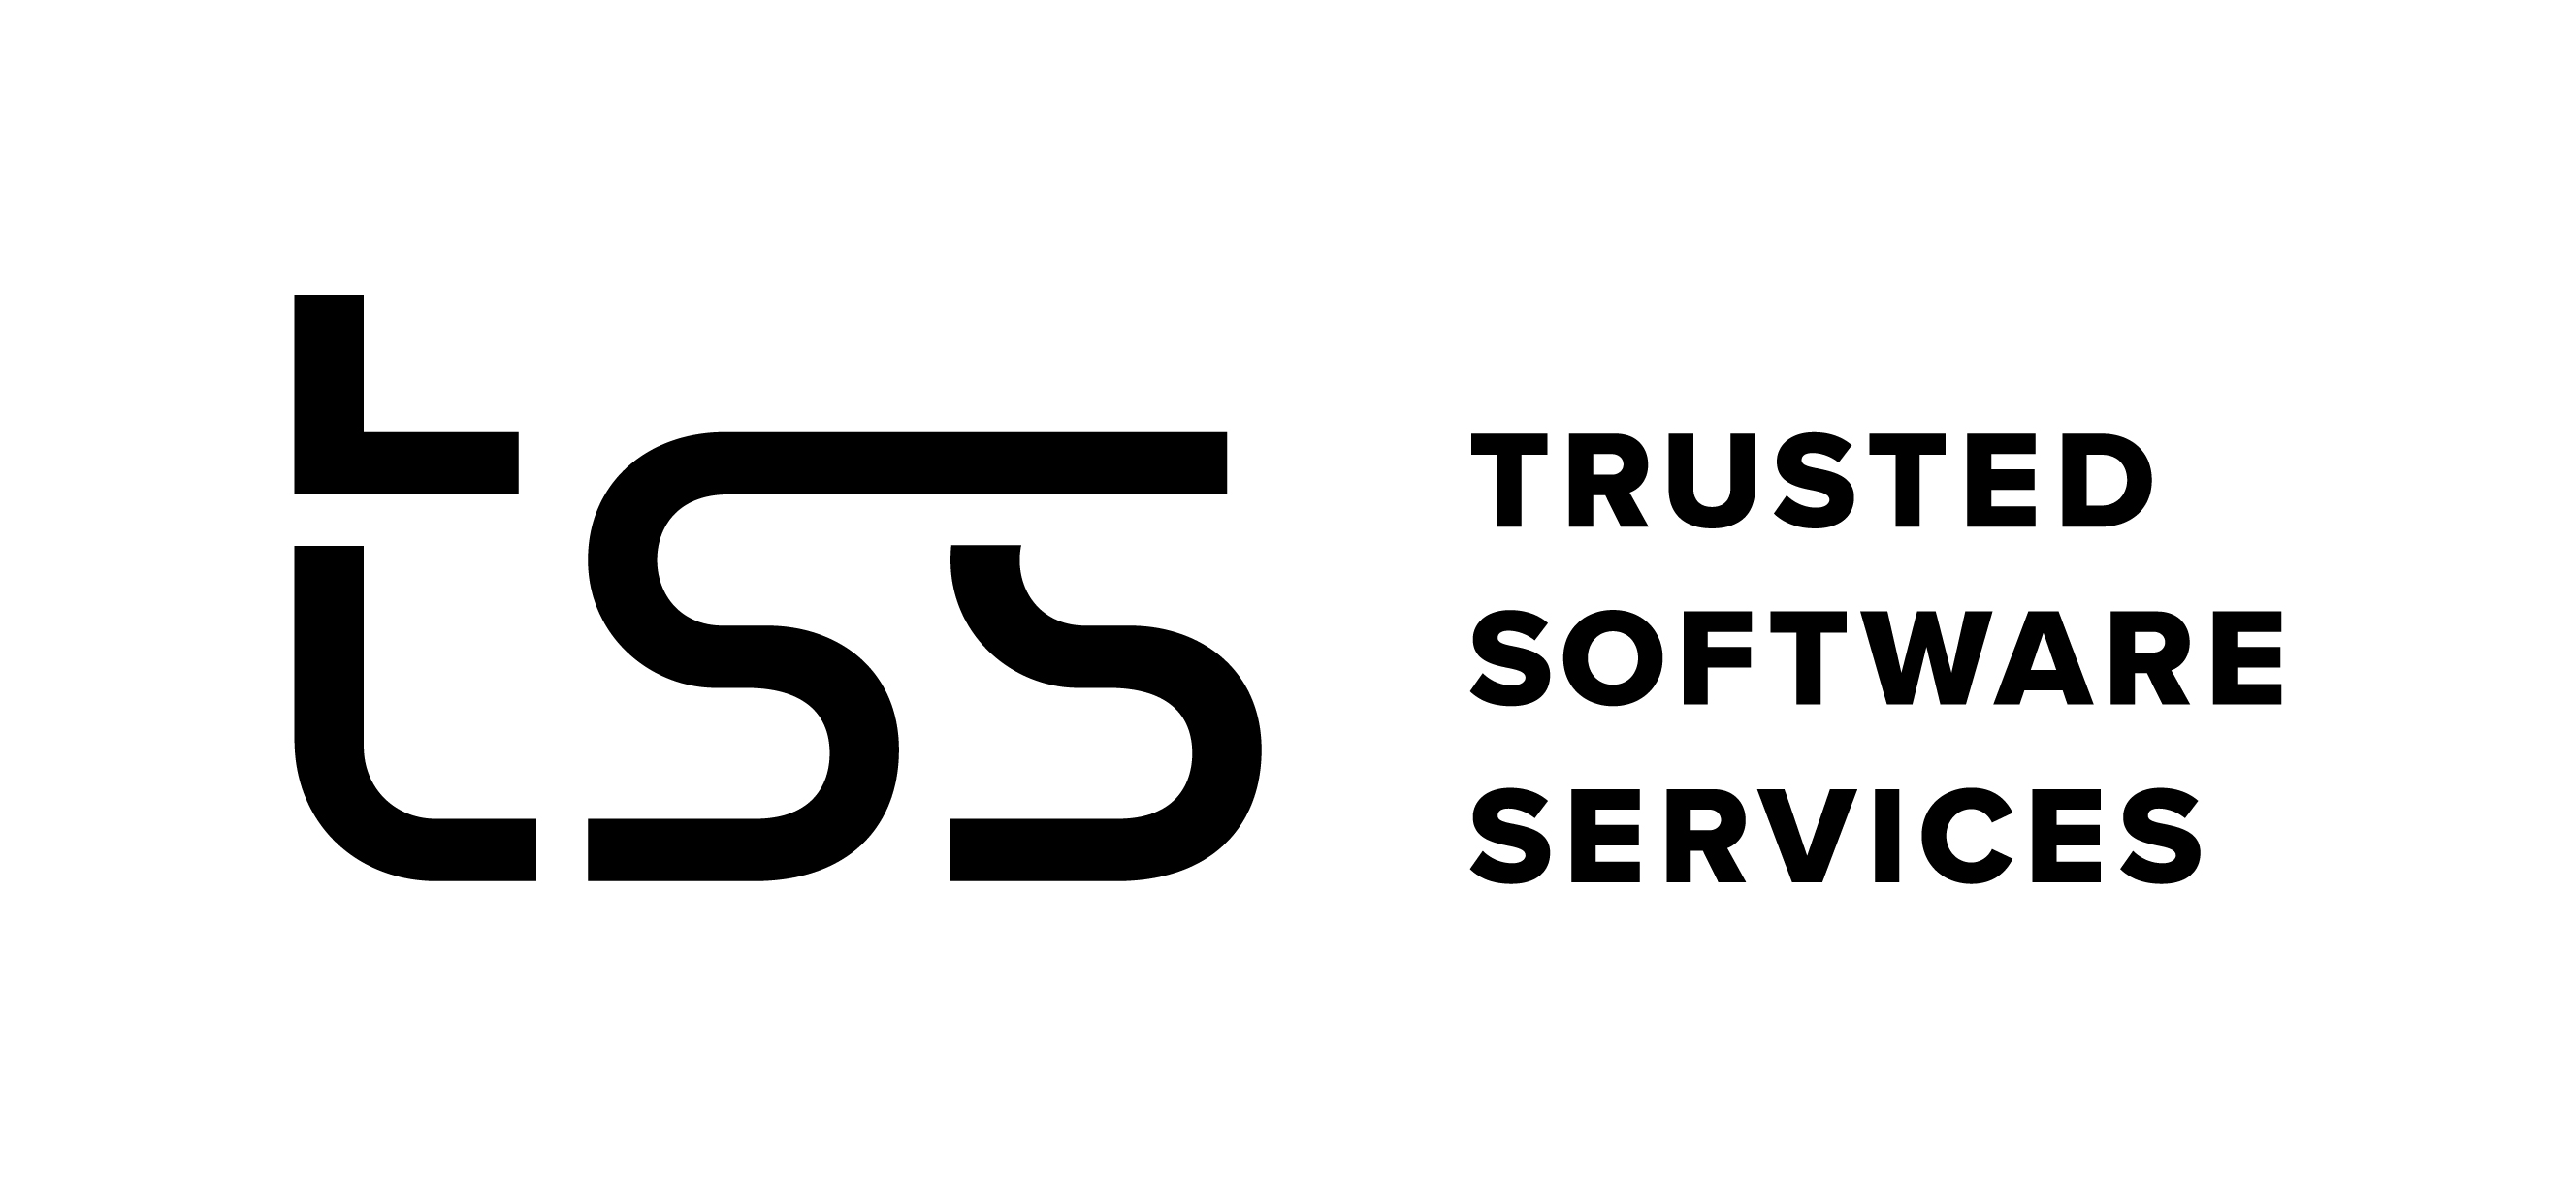 Trusted Software Services